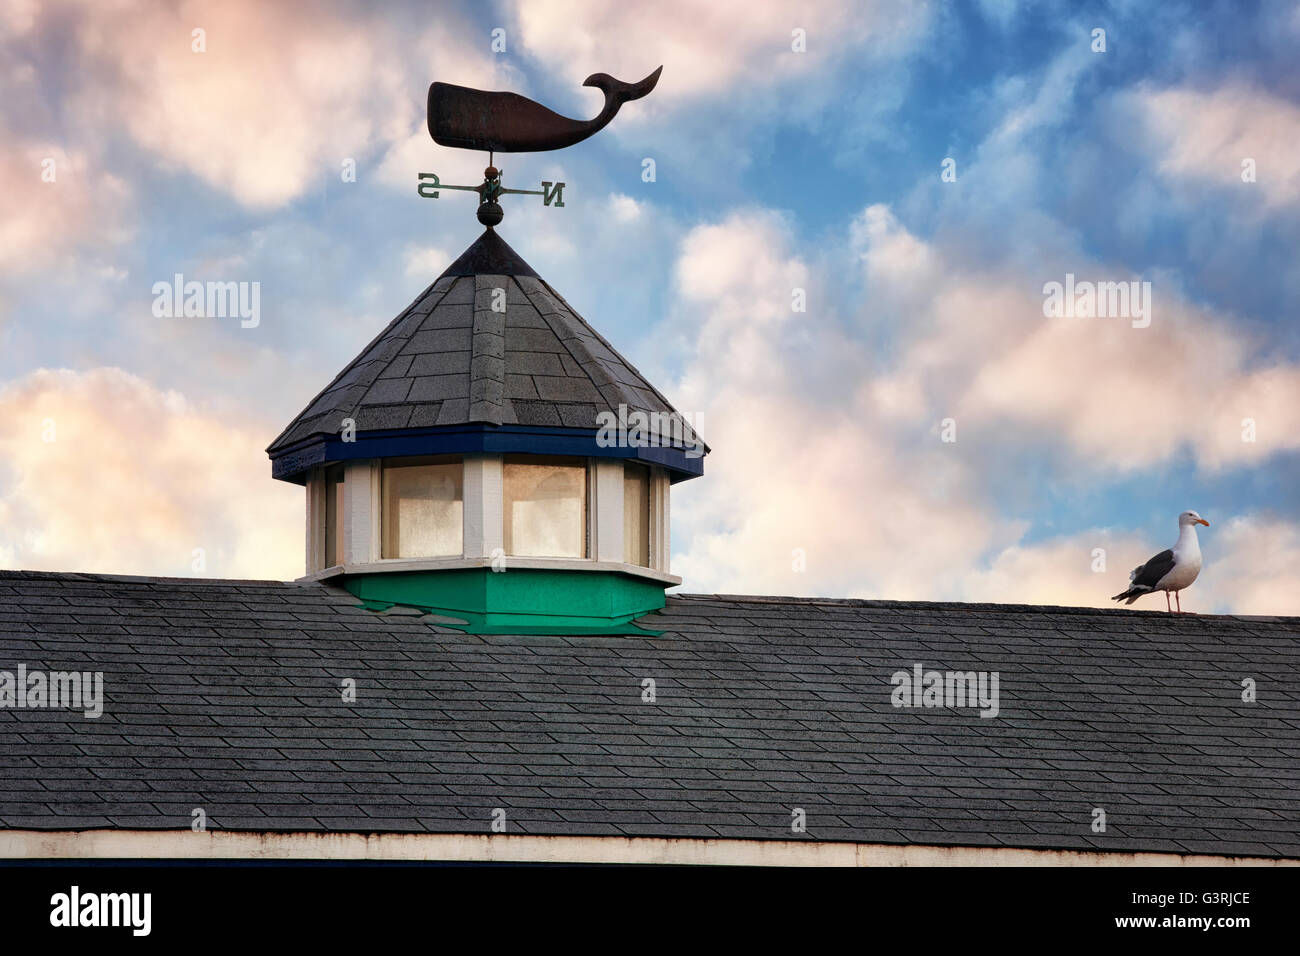 A whale of a weathervane at Fisherman’s Wharf in Monterey Harbor, California. Stock Photo